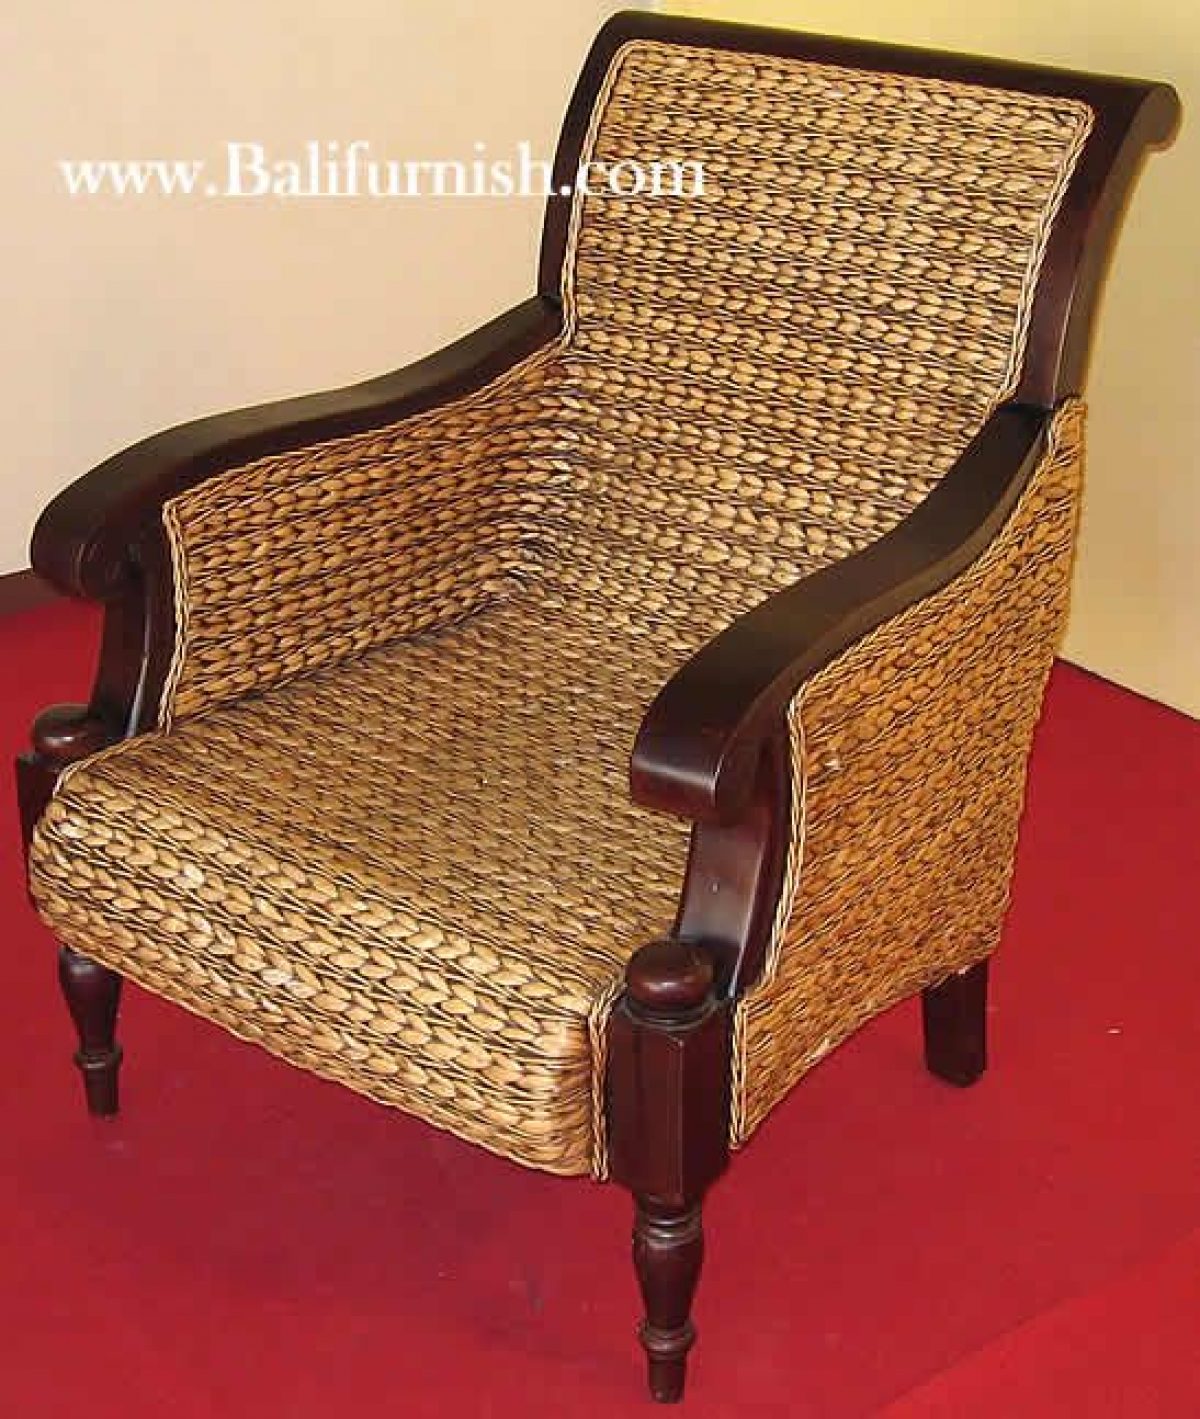 Tropical Plantation Style Furniture Indonesia Colonial Furniture